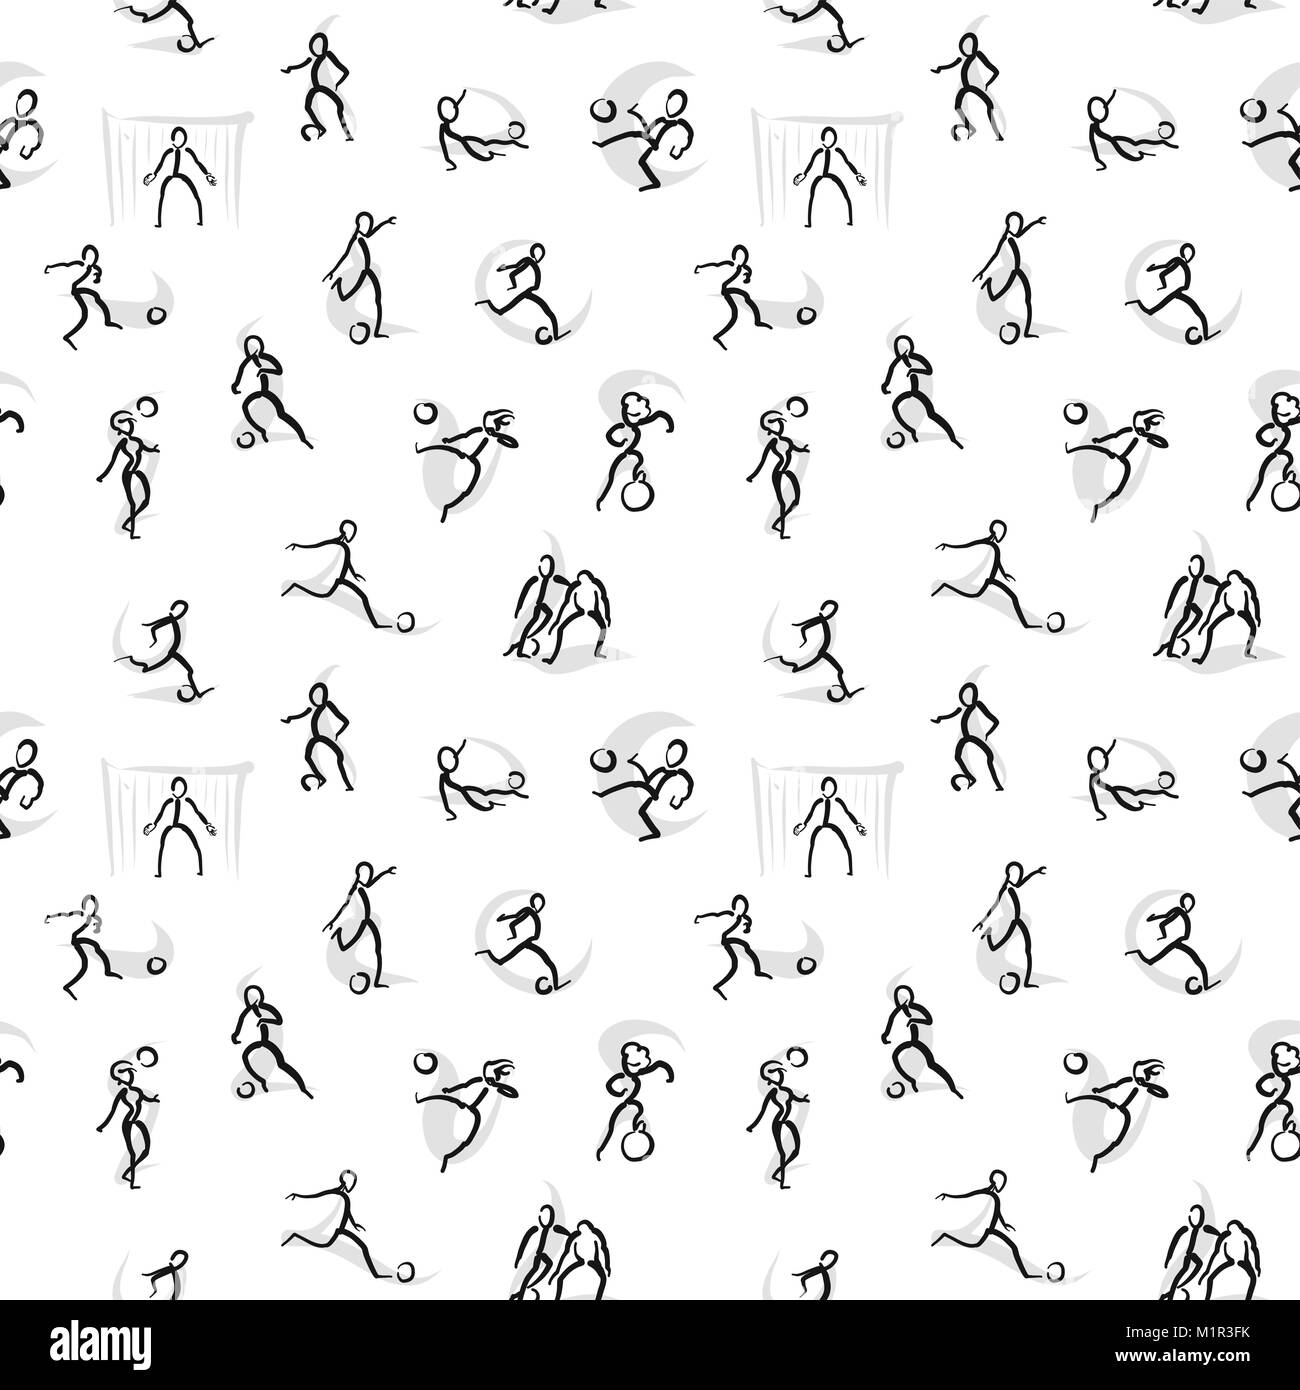 Seamless Set of Soccer Players - Wallpaper Design, hand drawn sketches on white backgound. Vector art Stock Vector